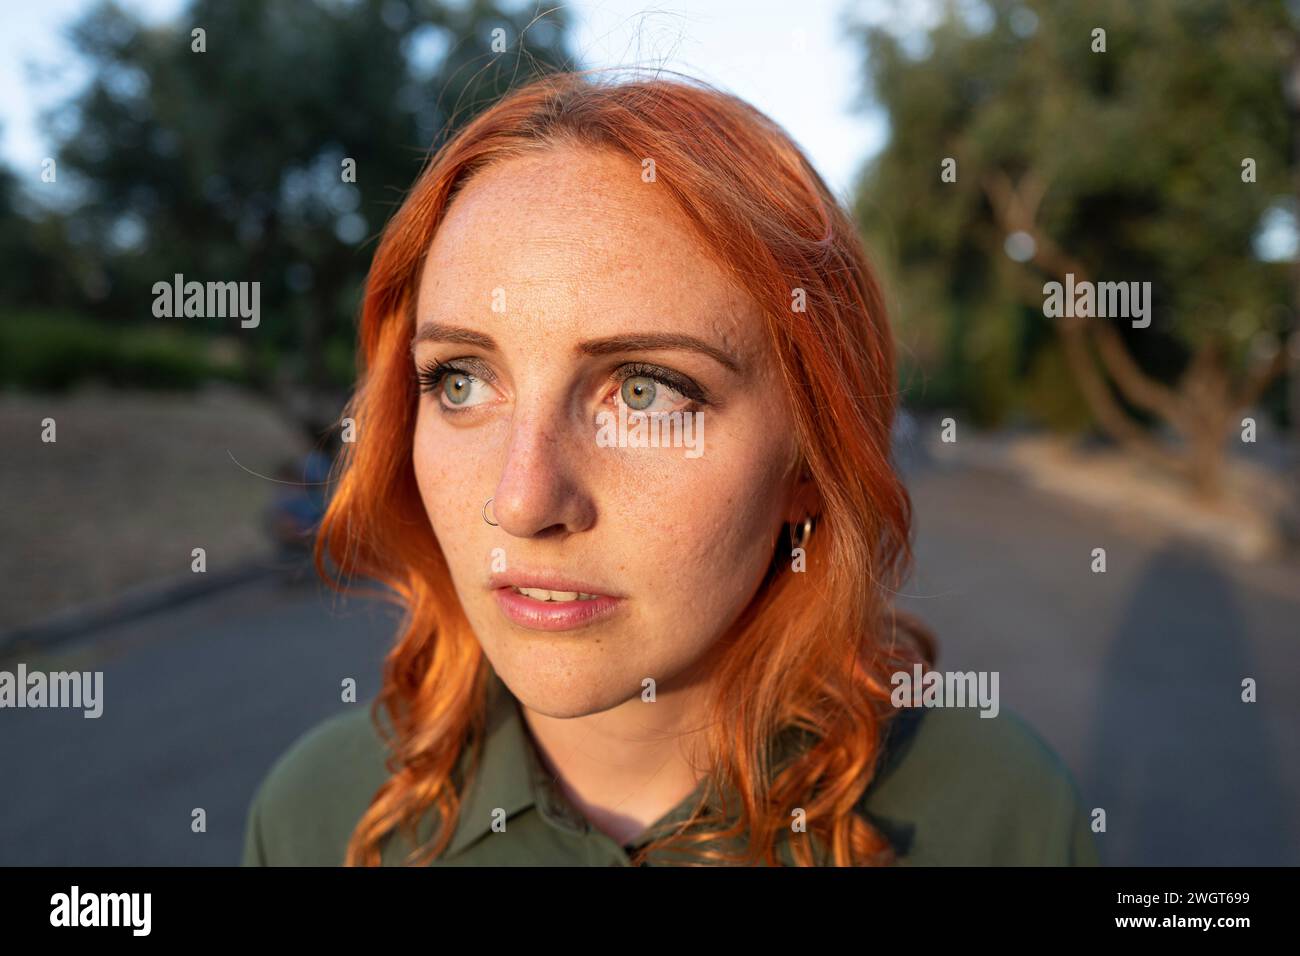 Young woman with red hair, Rome, Italy Stock Photo